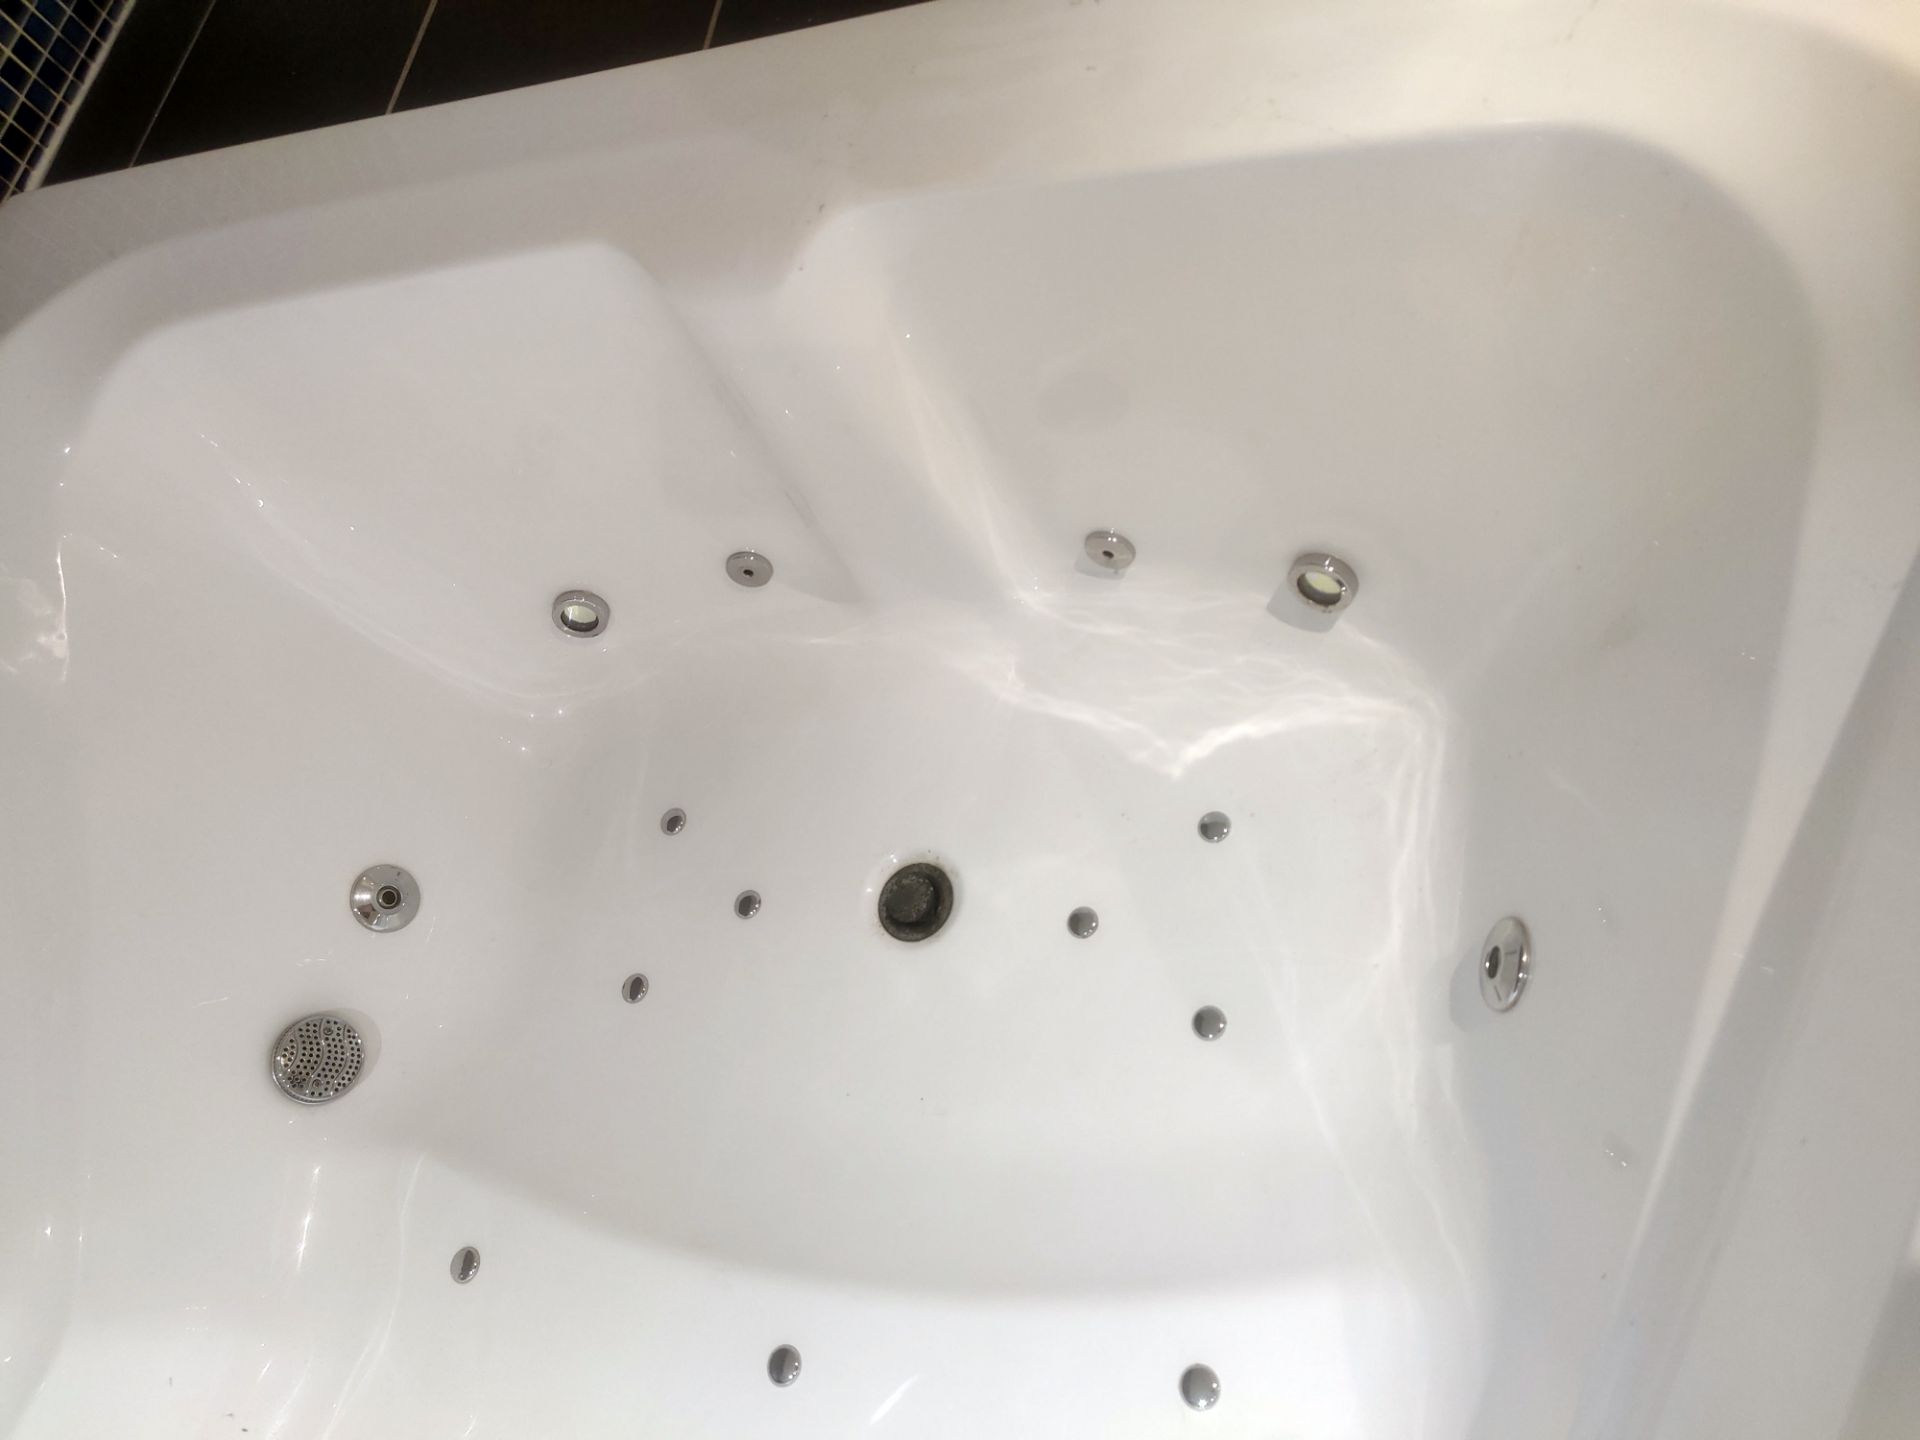 1 x Bronte Jacuzzi Whirlpool Bath - Approx 6.5ft x 5ft Size - Includes Brassware, Water Jets & Pump - Image 5 of 15